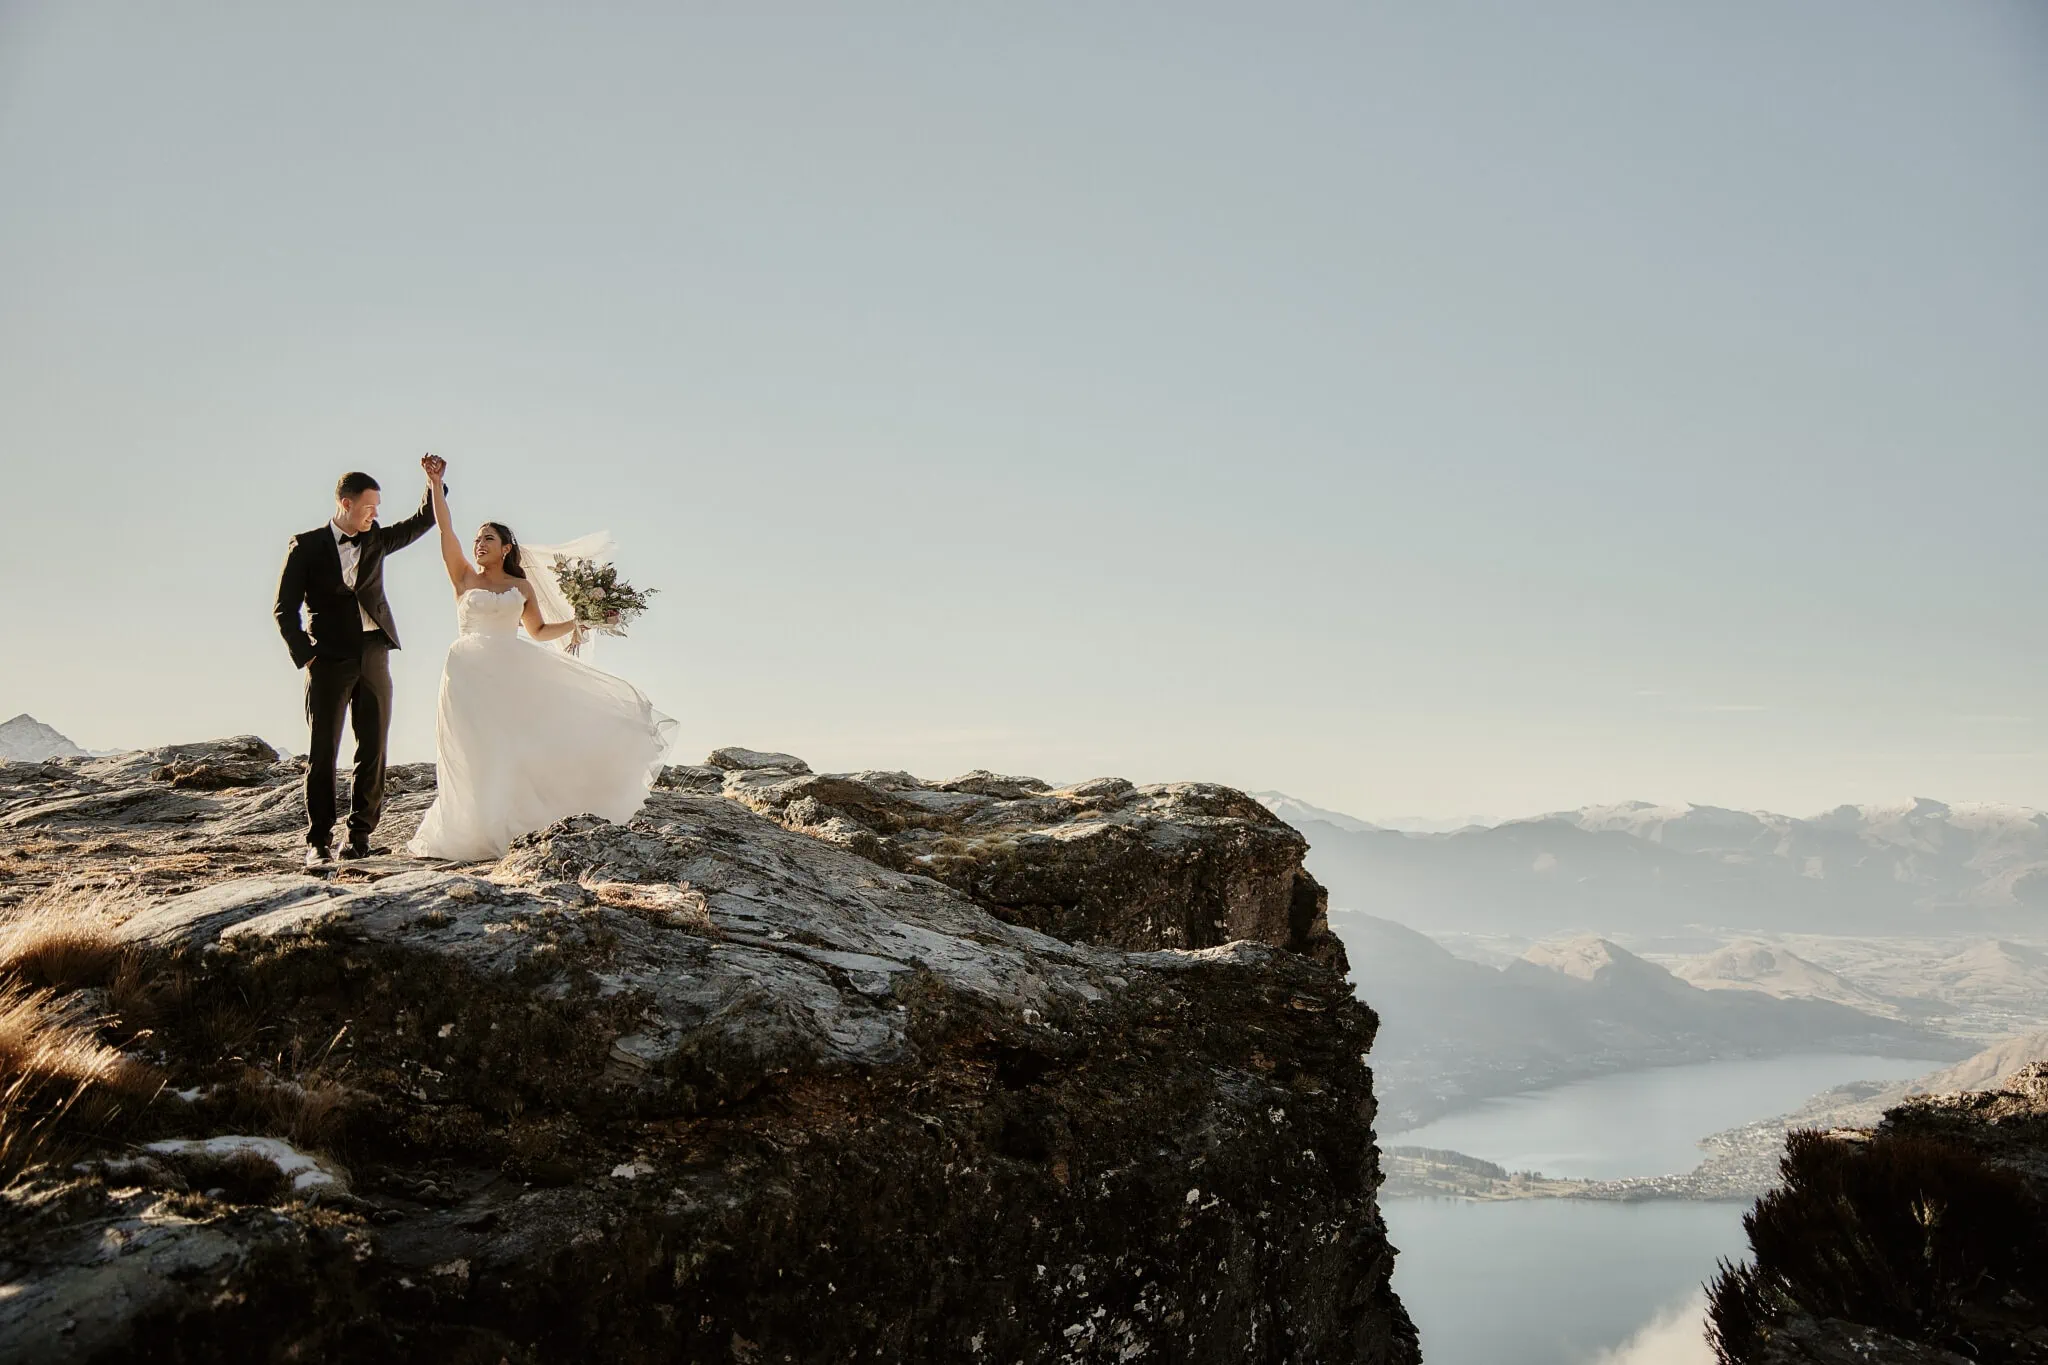 Queenstown New Zealand Elopement Wedding Photographer - Amy and Callum's Queenstown Heli Pre Wedding Shoot takes them to a cliff in New Zealand.